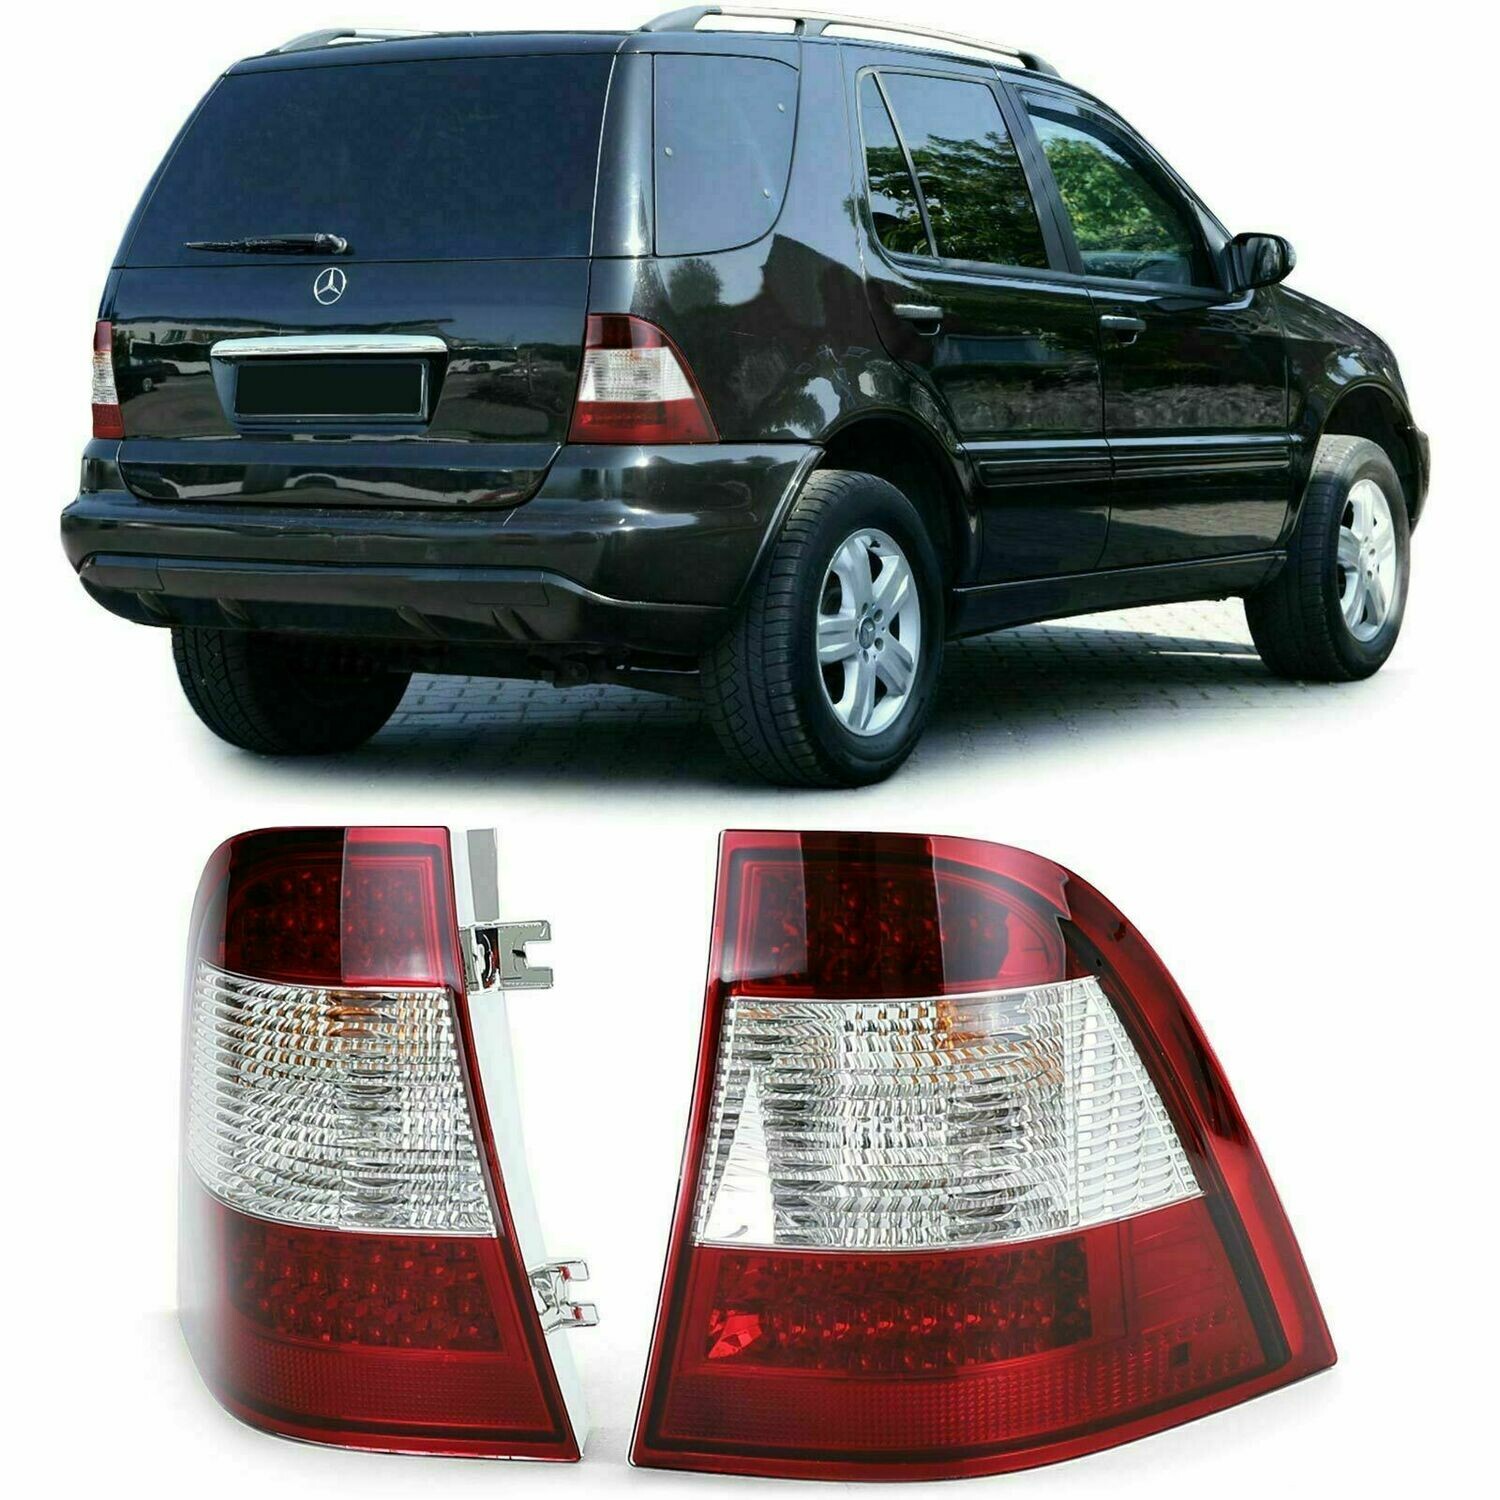 Rear LED lights RED-CLEAR for Mercedes ML W163 98-05